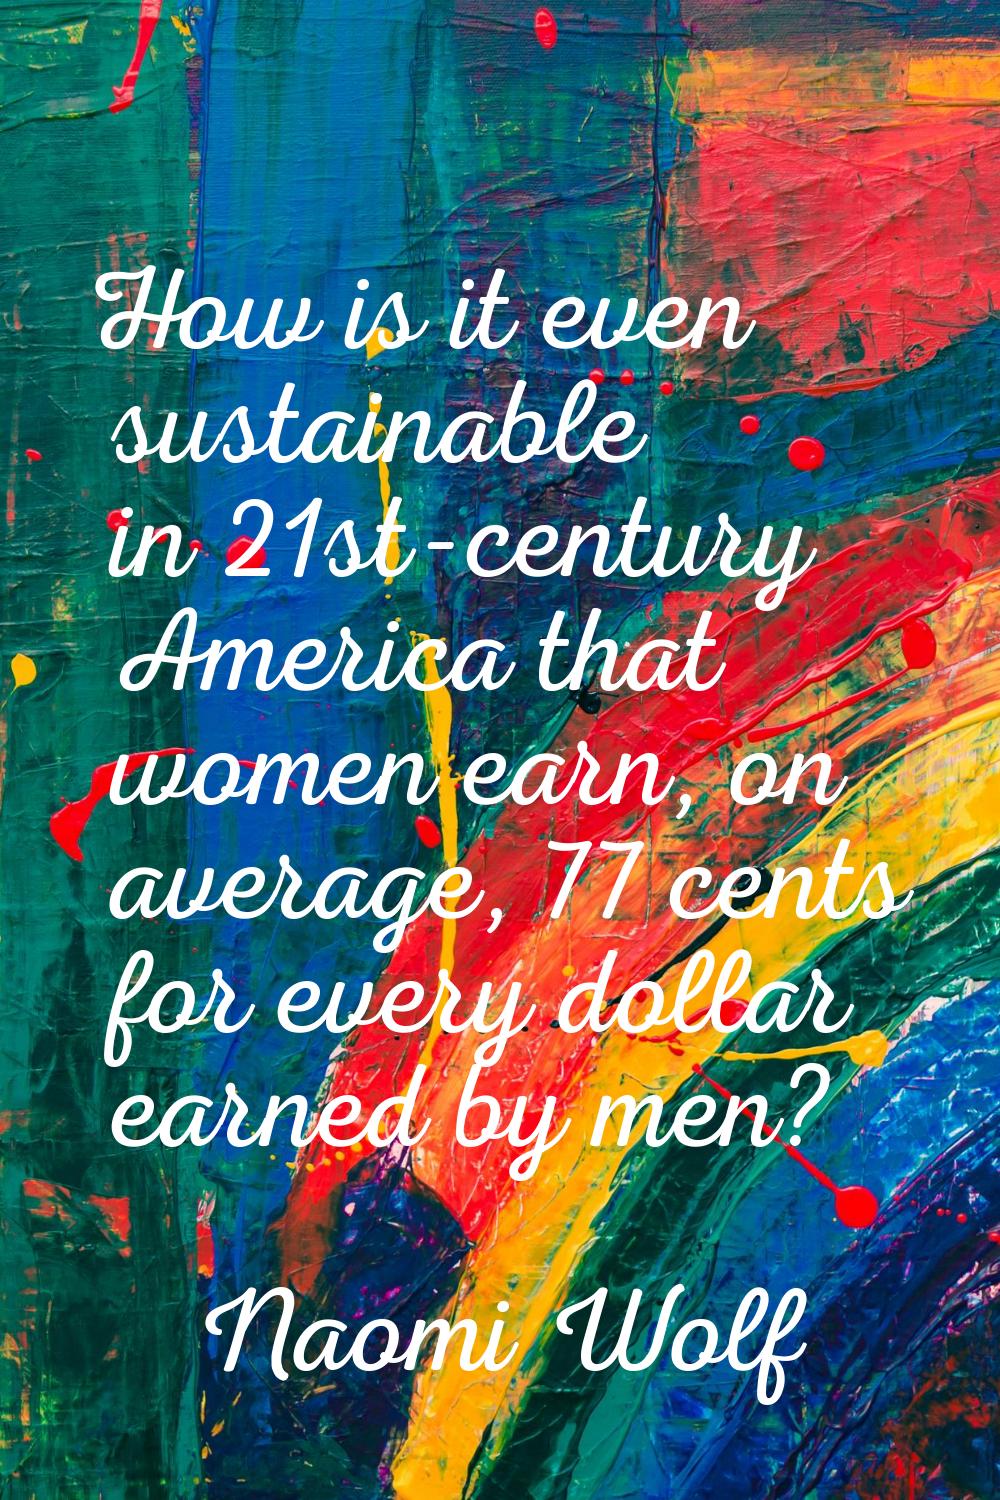 How is it even sustainable in 21st-century America that women earn, on average, 77 cents for every 